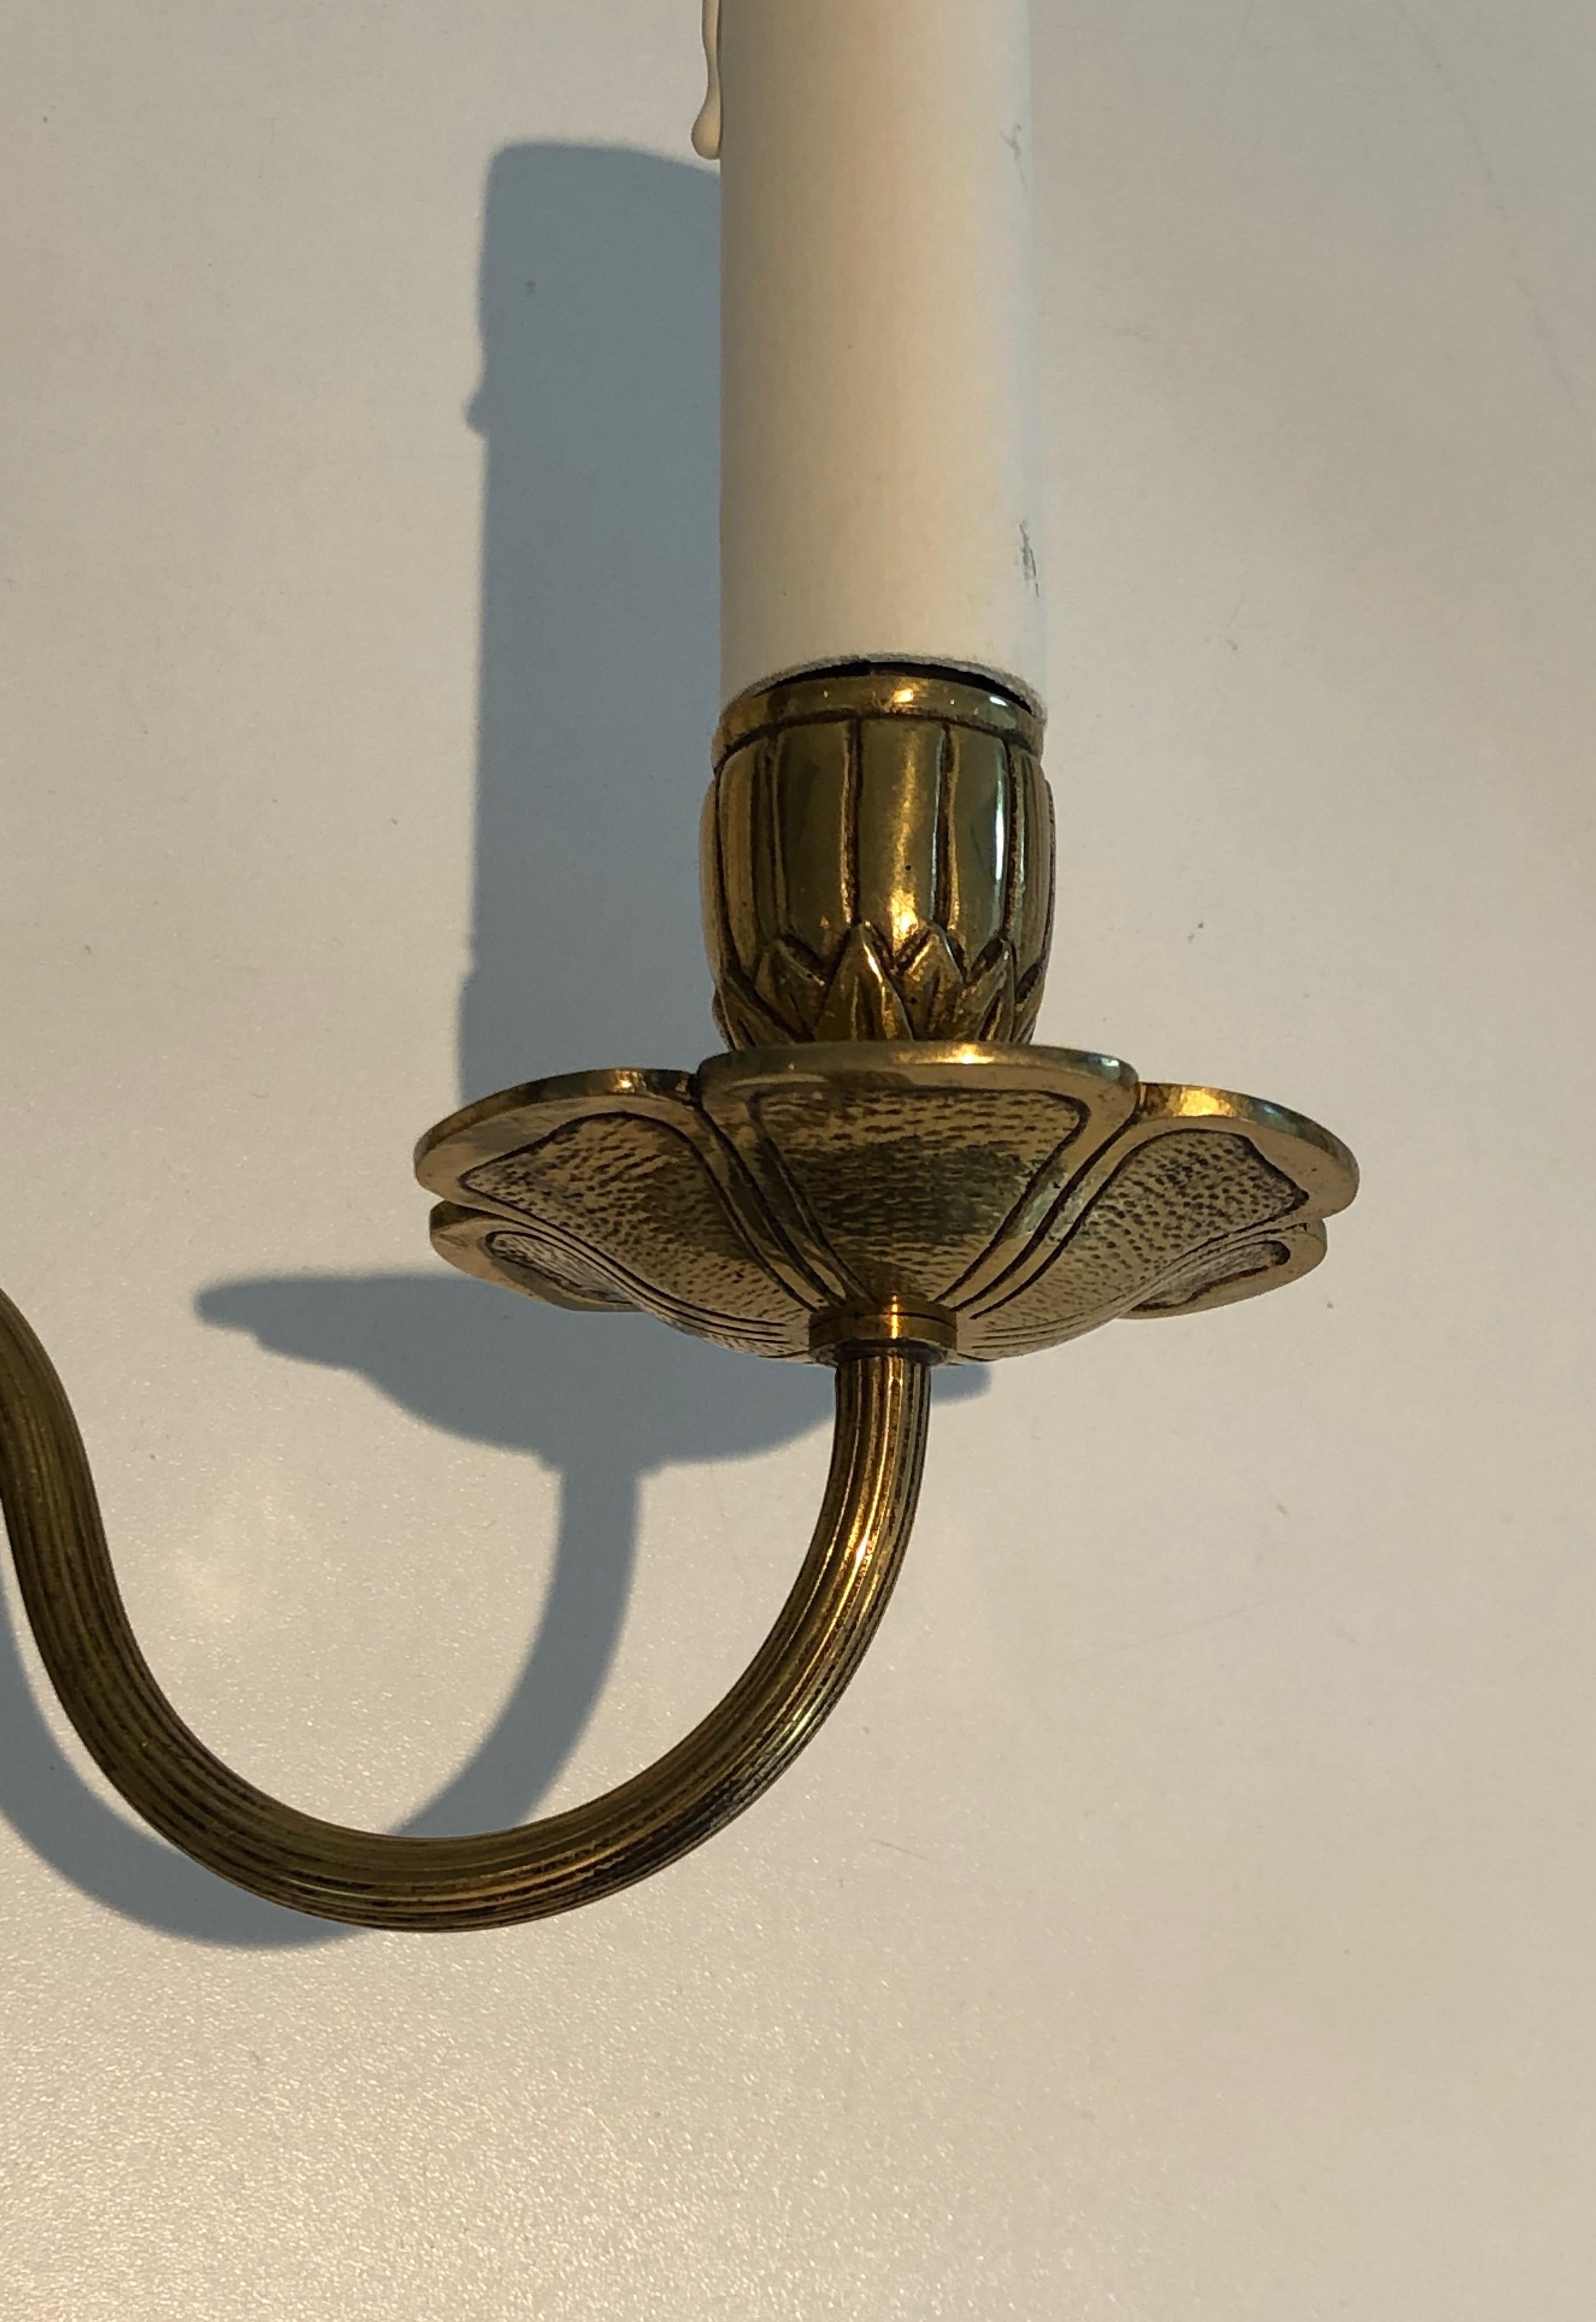 Pair of Louis the 16th Style Bronze Wall Lights with Ribbons, French, circa 1950 For Sale 5